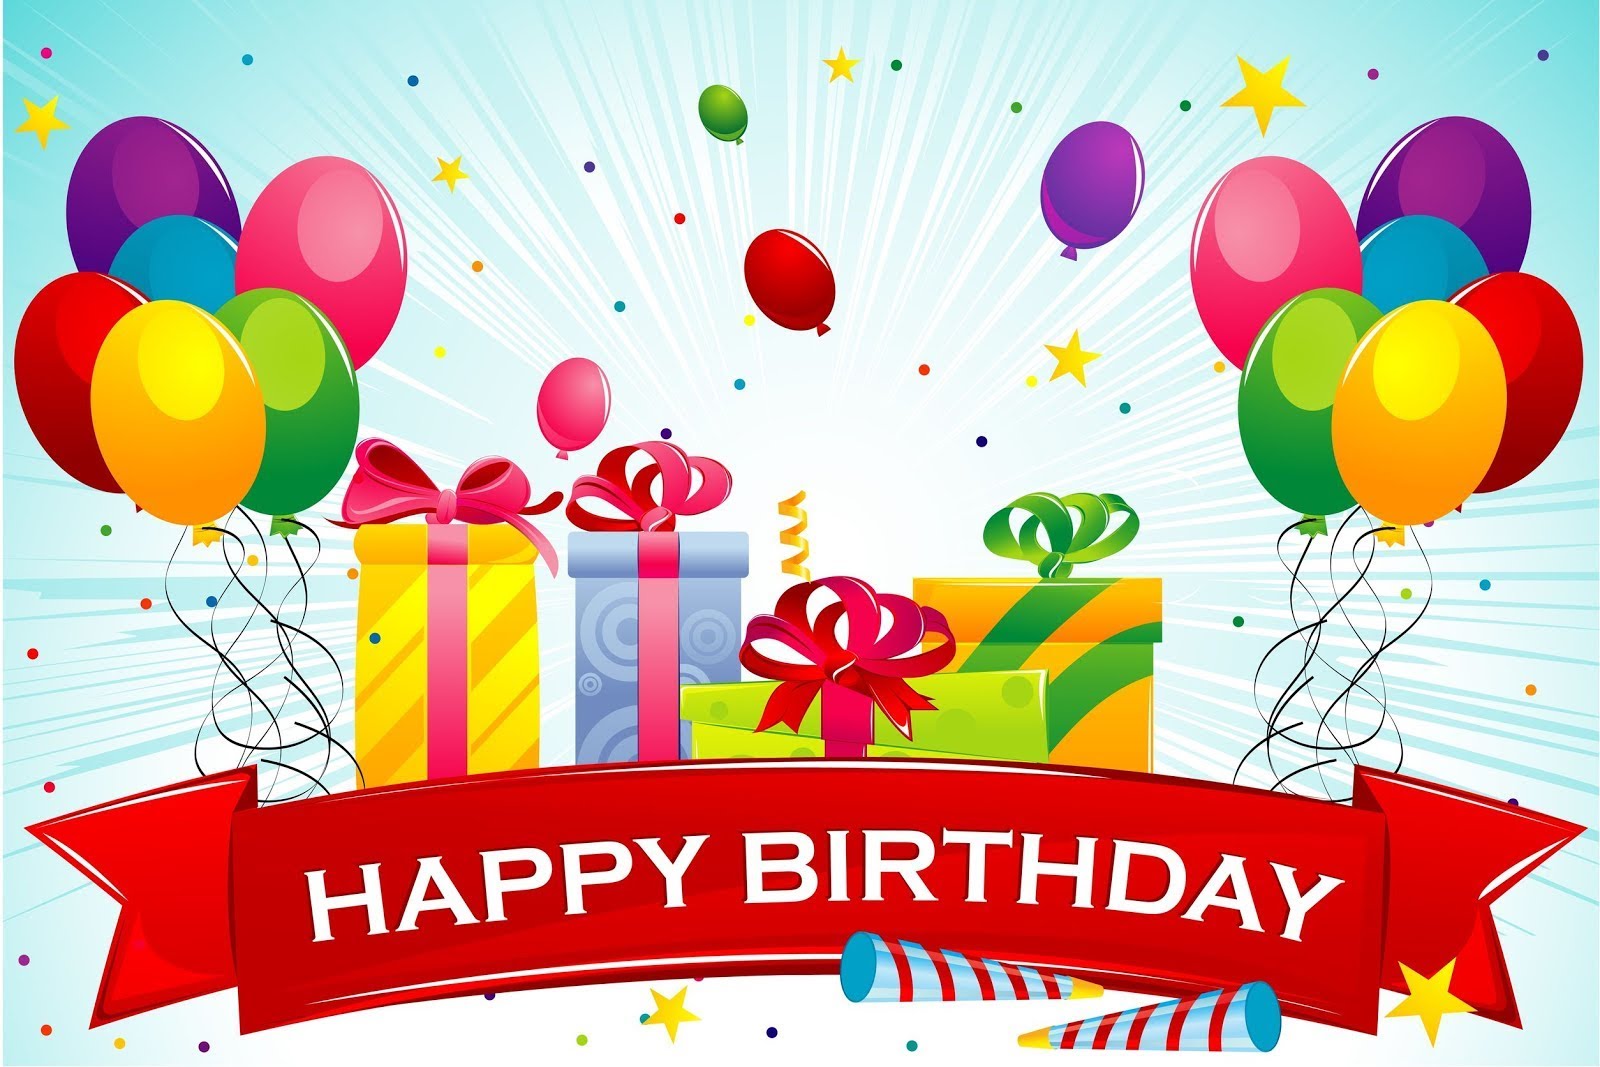 Happy Birthday Wishes, Images, Messages, Quotes and Cards